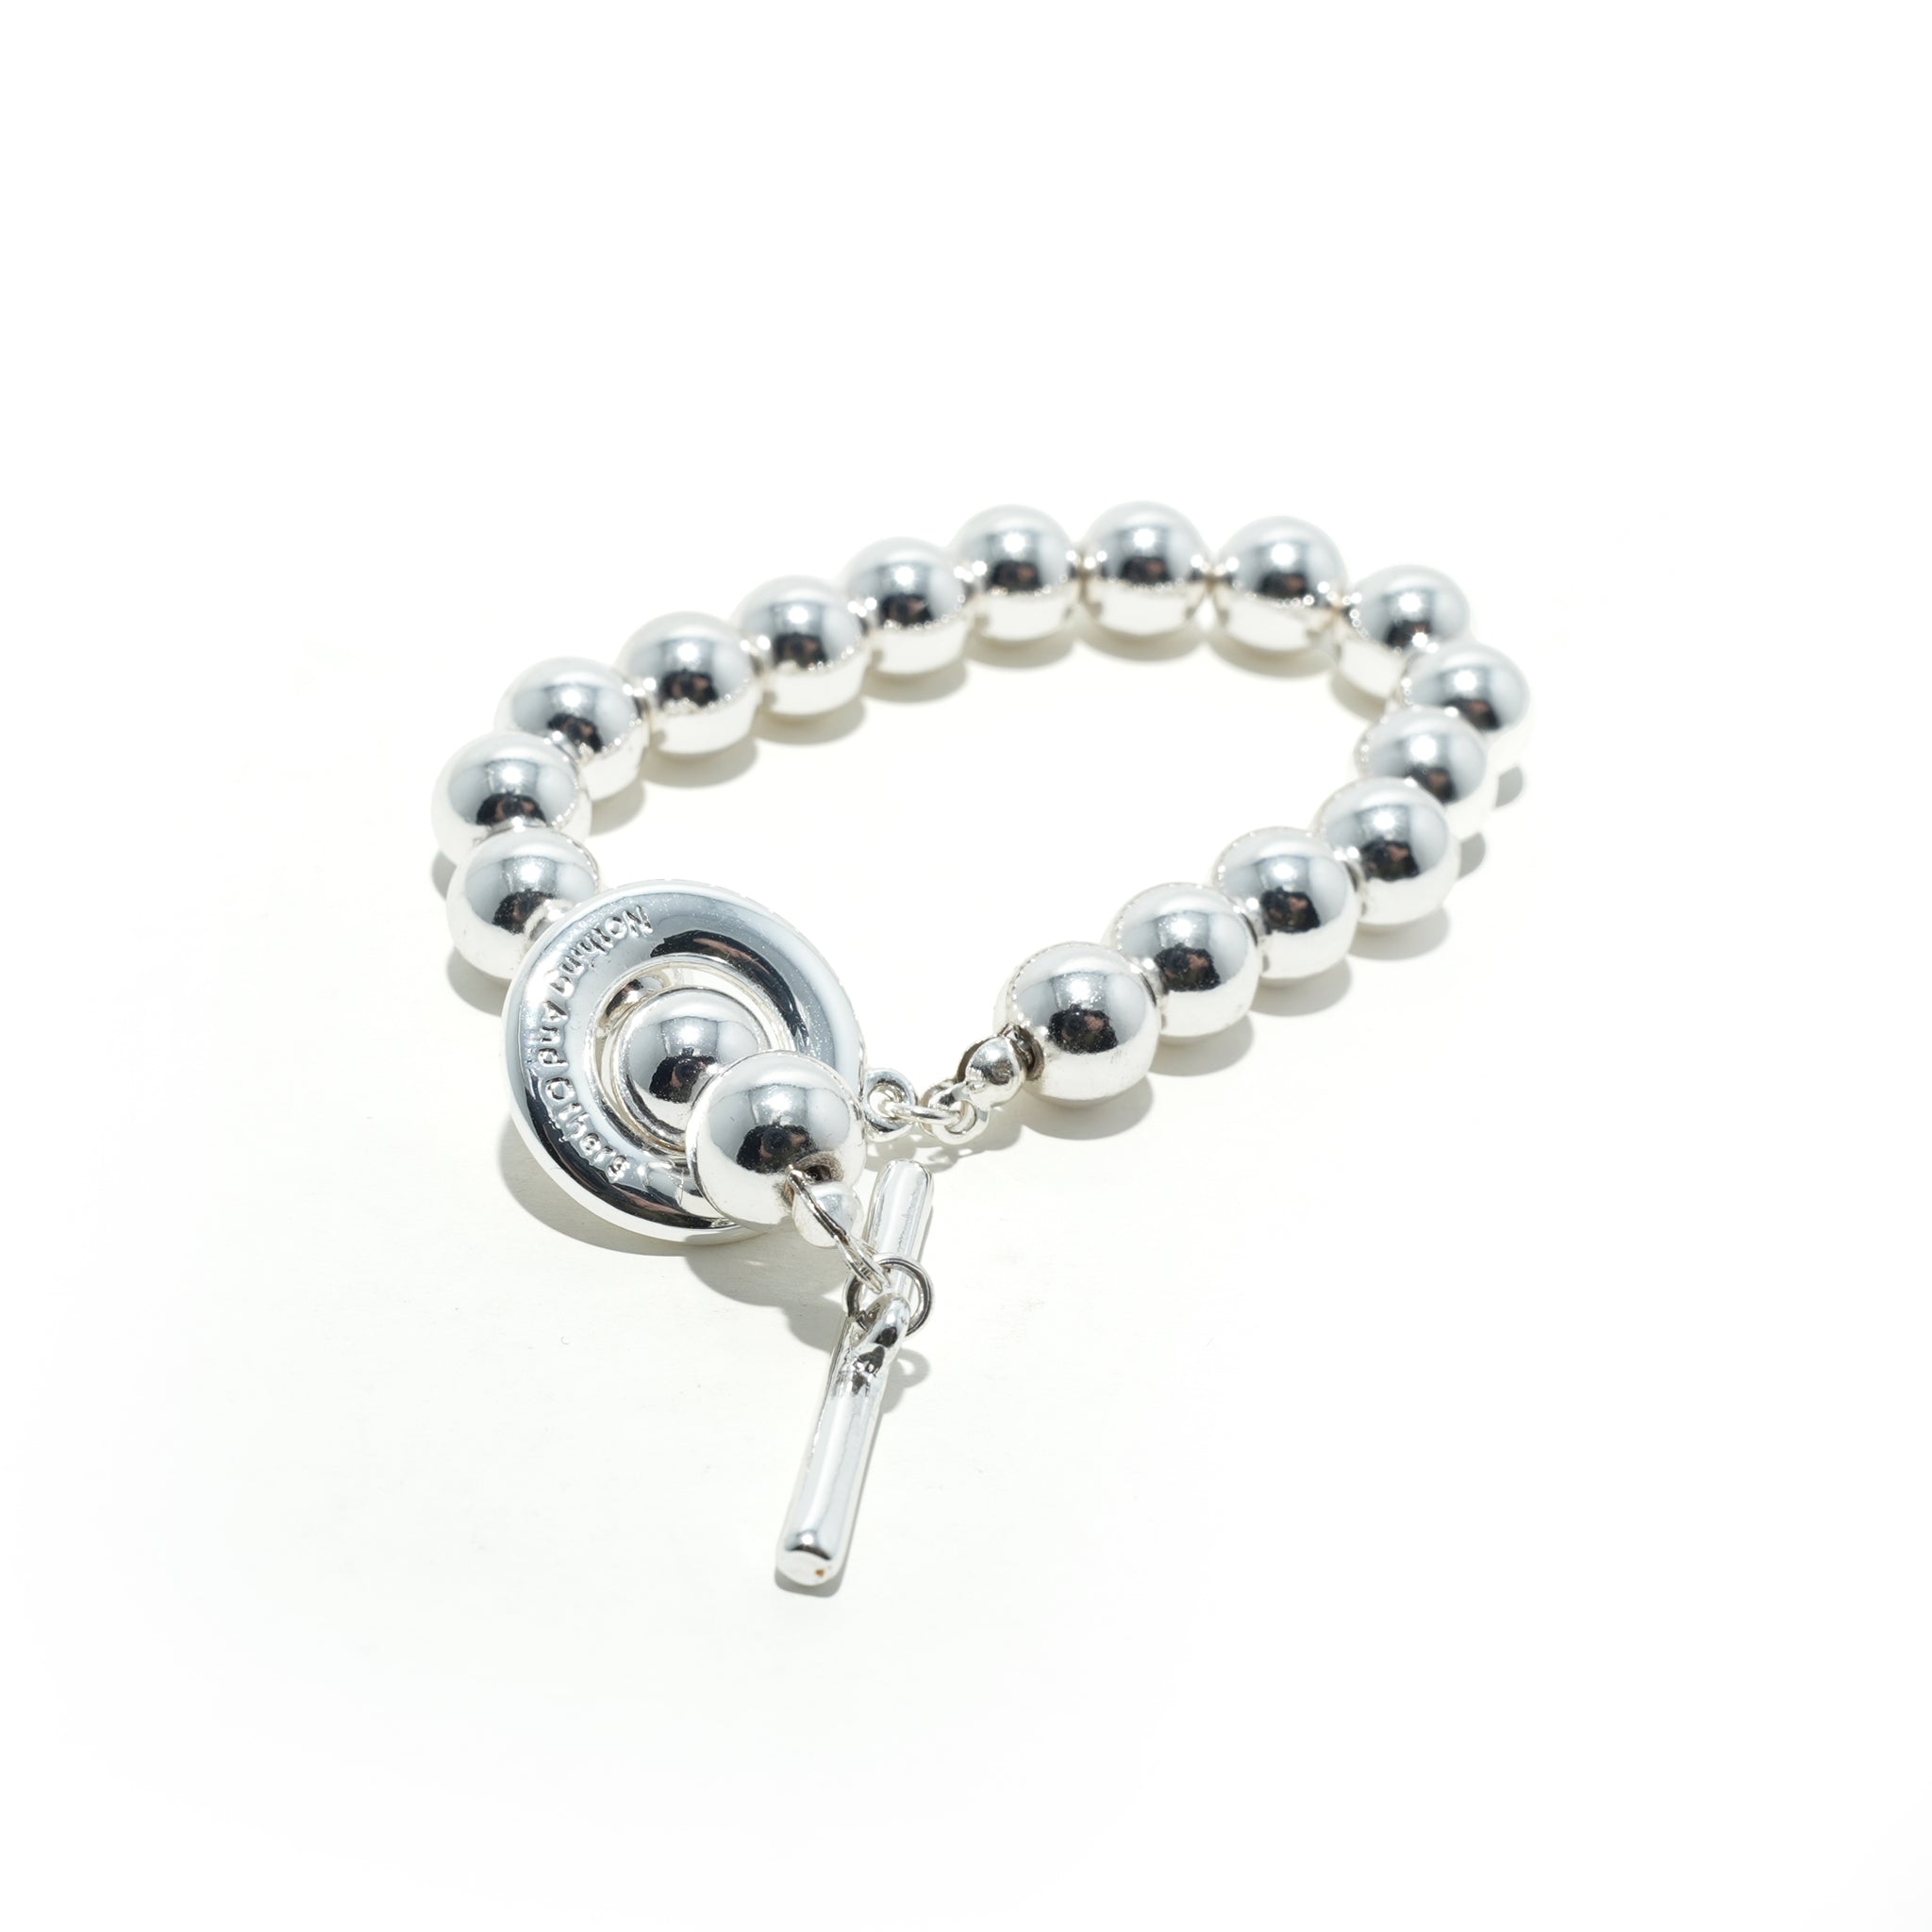 No:C41012089 | Name:Dot Bracelet | Color:Silver【NOTHING AND OTHERS_ナッシングアンドアザーズ】【ネコポス選択可能】